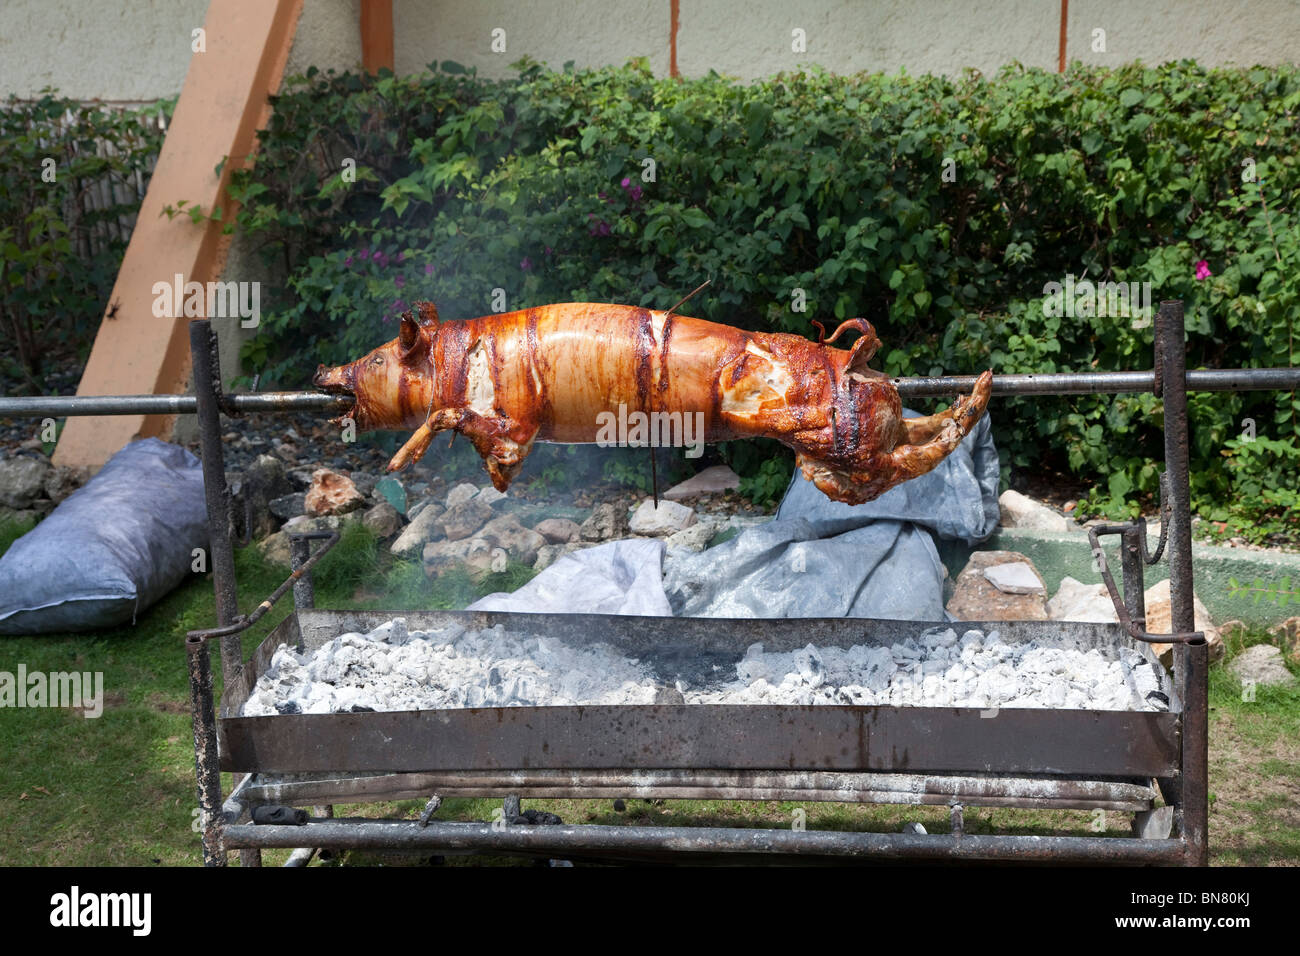 hog roast cooking on spit. Stock Photo